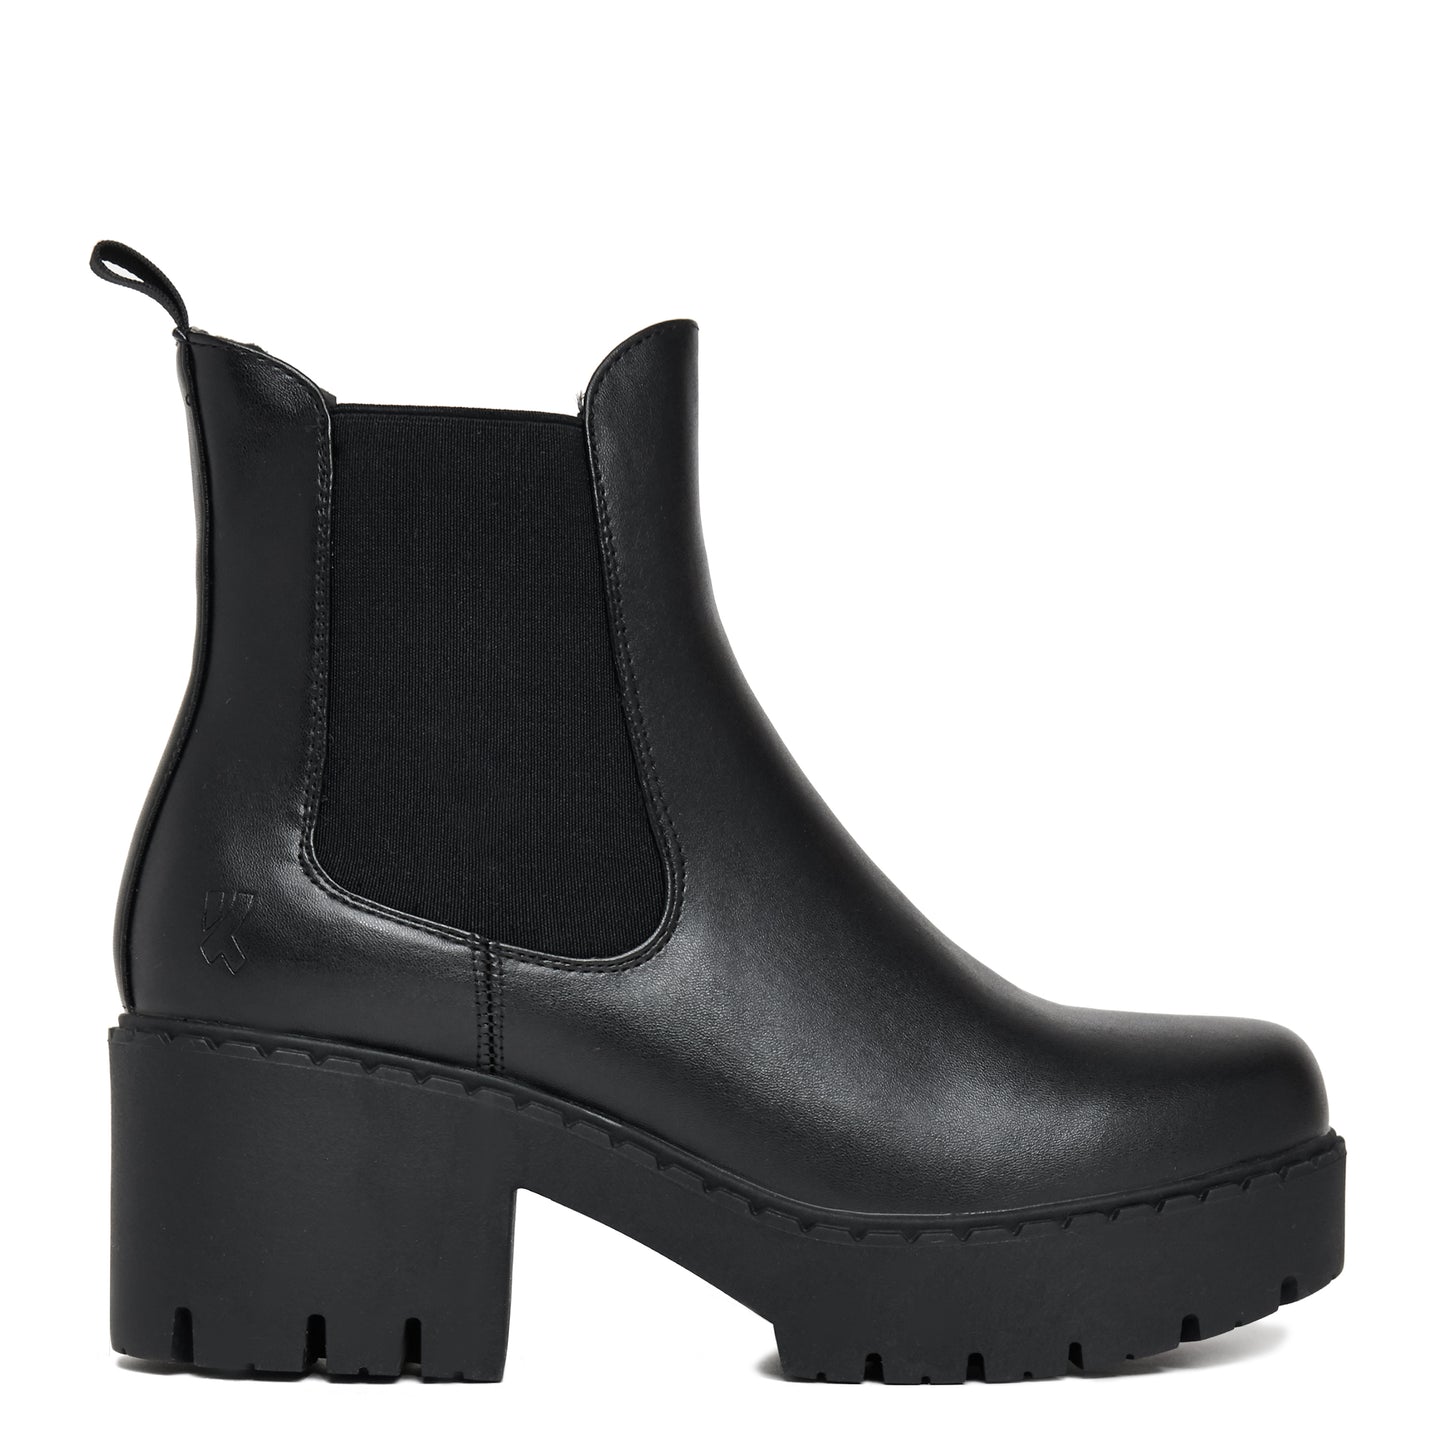 Orson Switch Chelsea Boots - Ankle Boots - KOI Footwear - Black - Main View